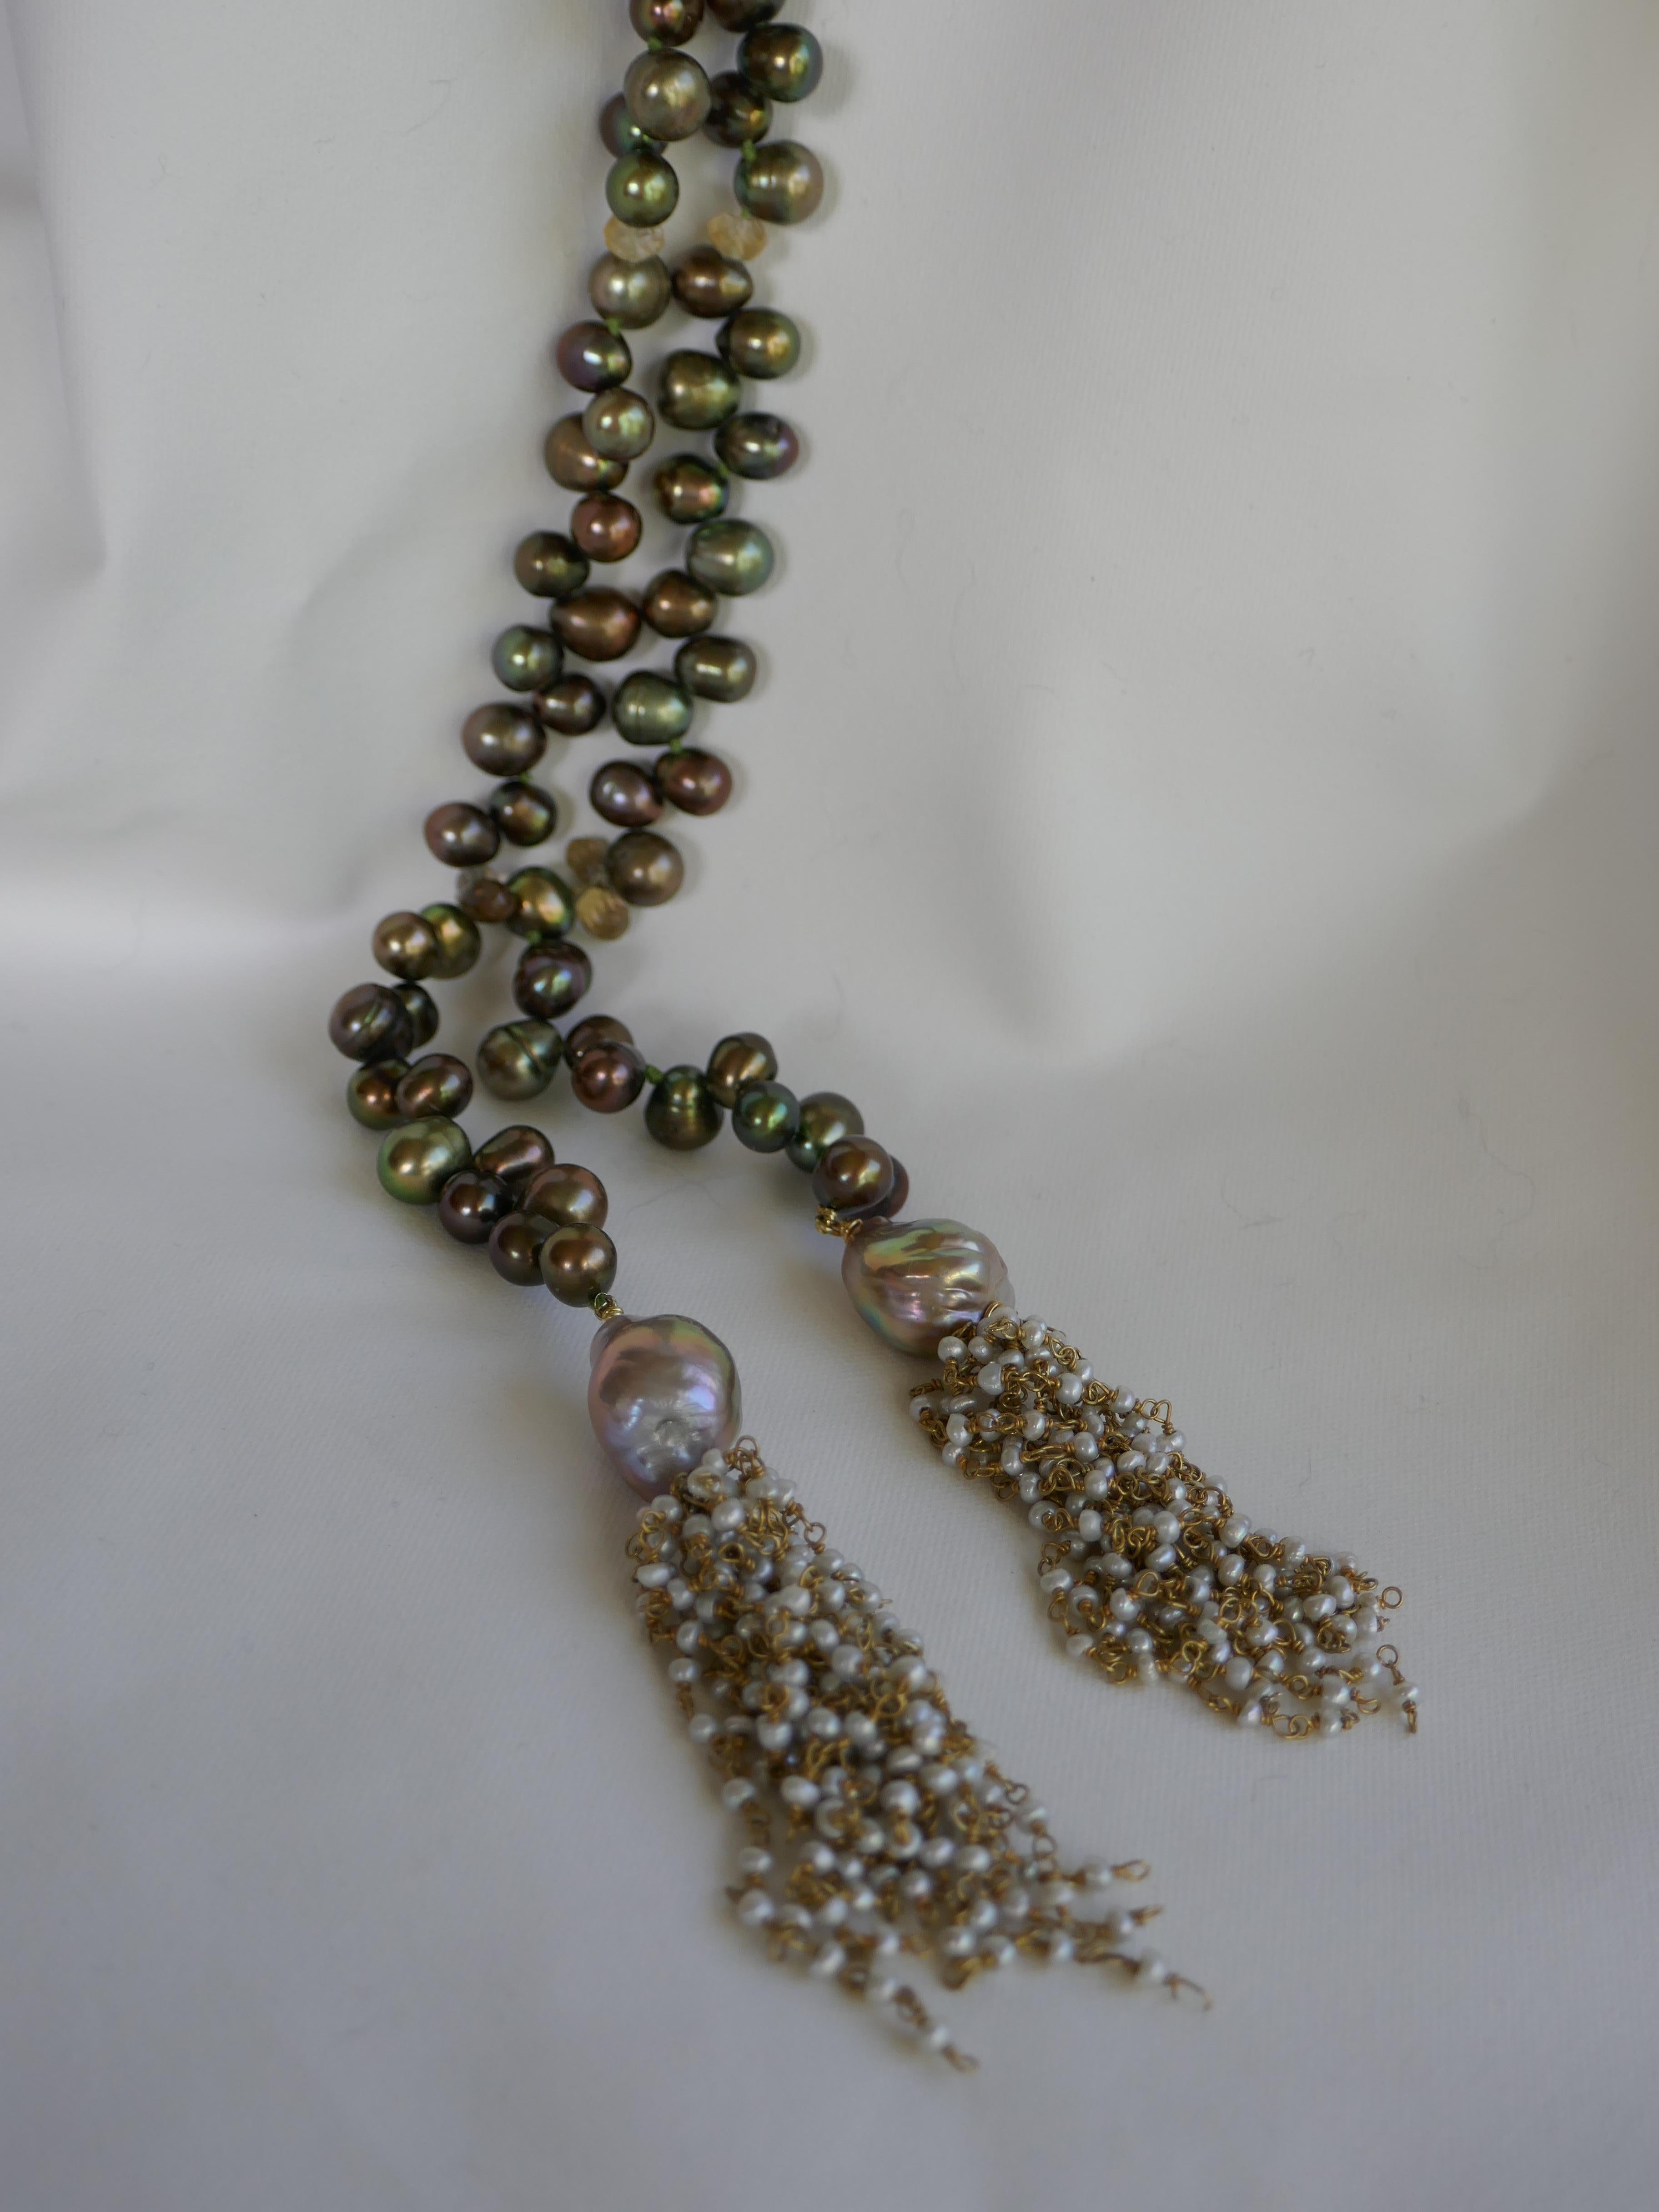 The drop cultured pearls in this necklace are peacock green in color and finished with a keshi pearl vermeil sterling silver chain tassel, and baroque cultured pearls.  Citrine roundels are interspersed throughout the necklace. The drop cultured